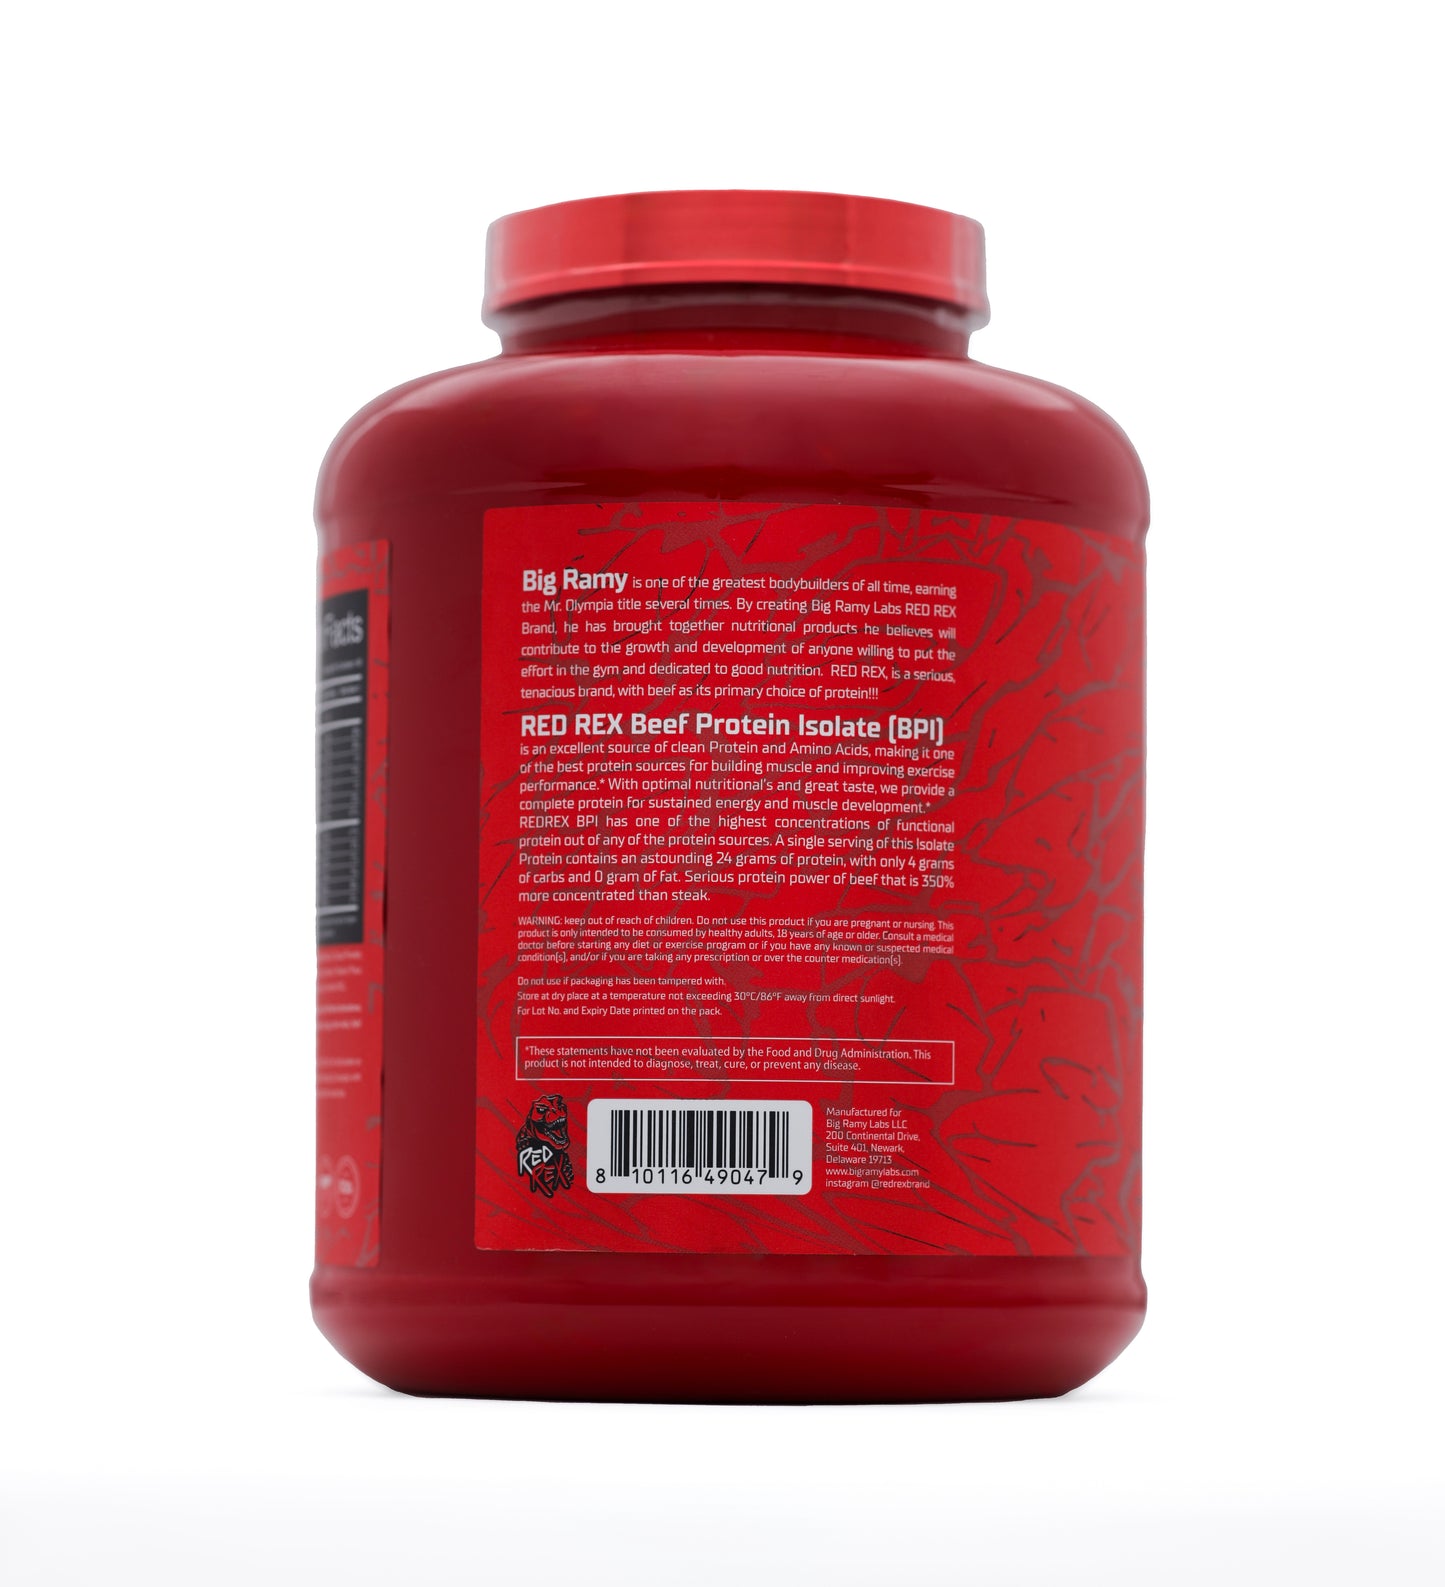 RED REX 100% BEEF PROTEIN ISOLATE